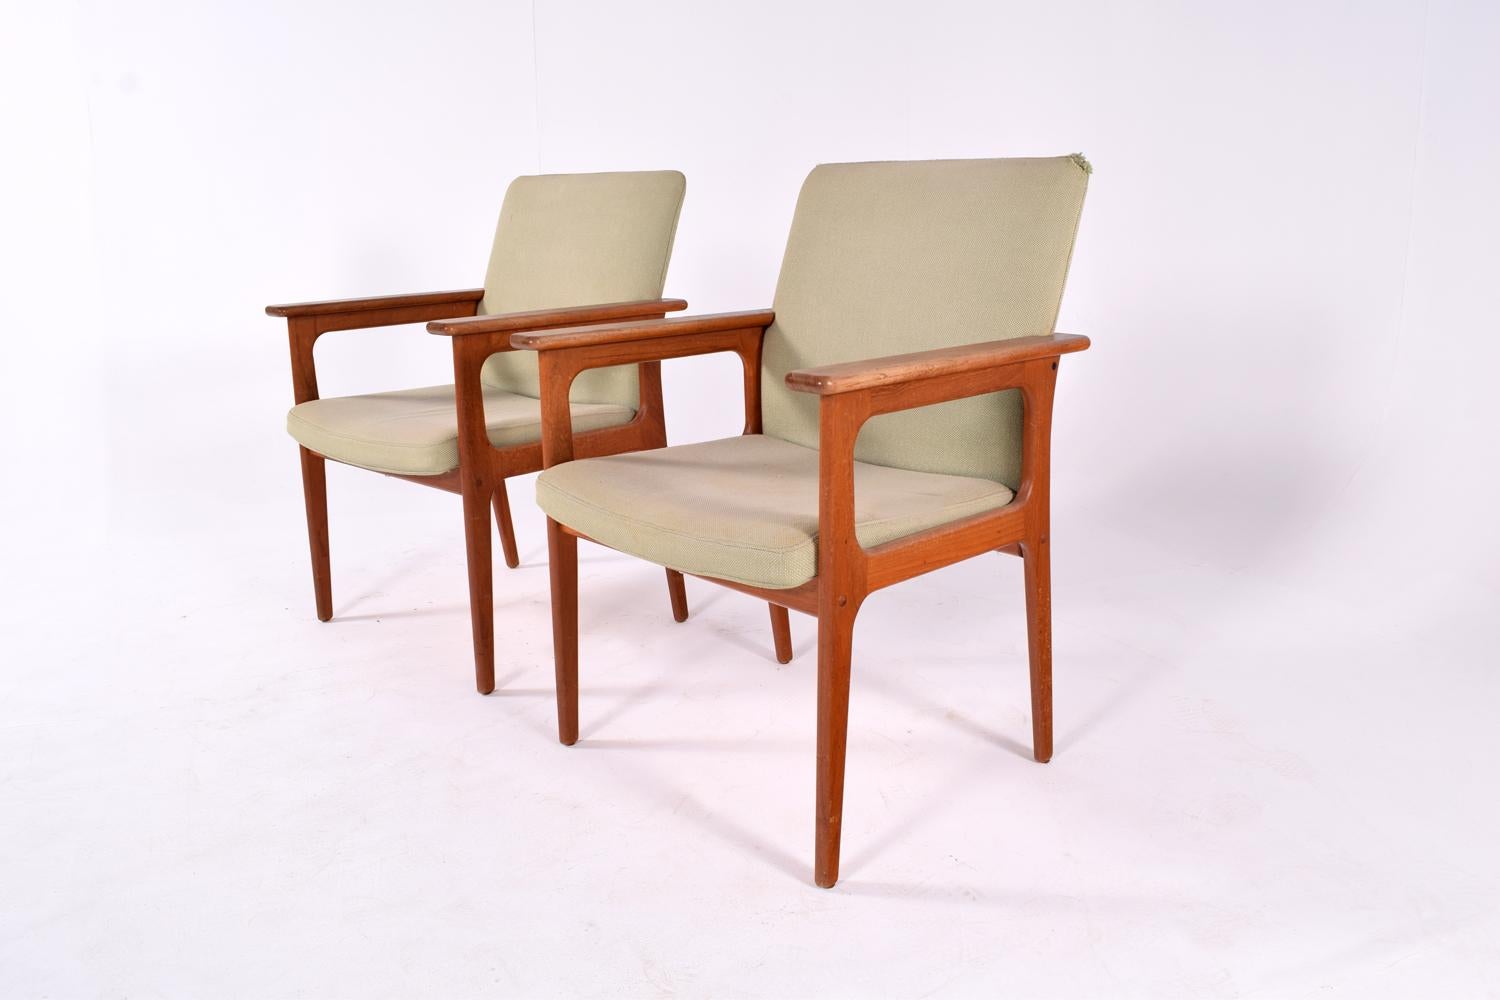 Pair of armchairs designed and manufactured in Denmark by O. D. Mobler of Copenhagen during the 1960s. Made from solid teak. The chairs are upholstered in dry green.